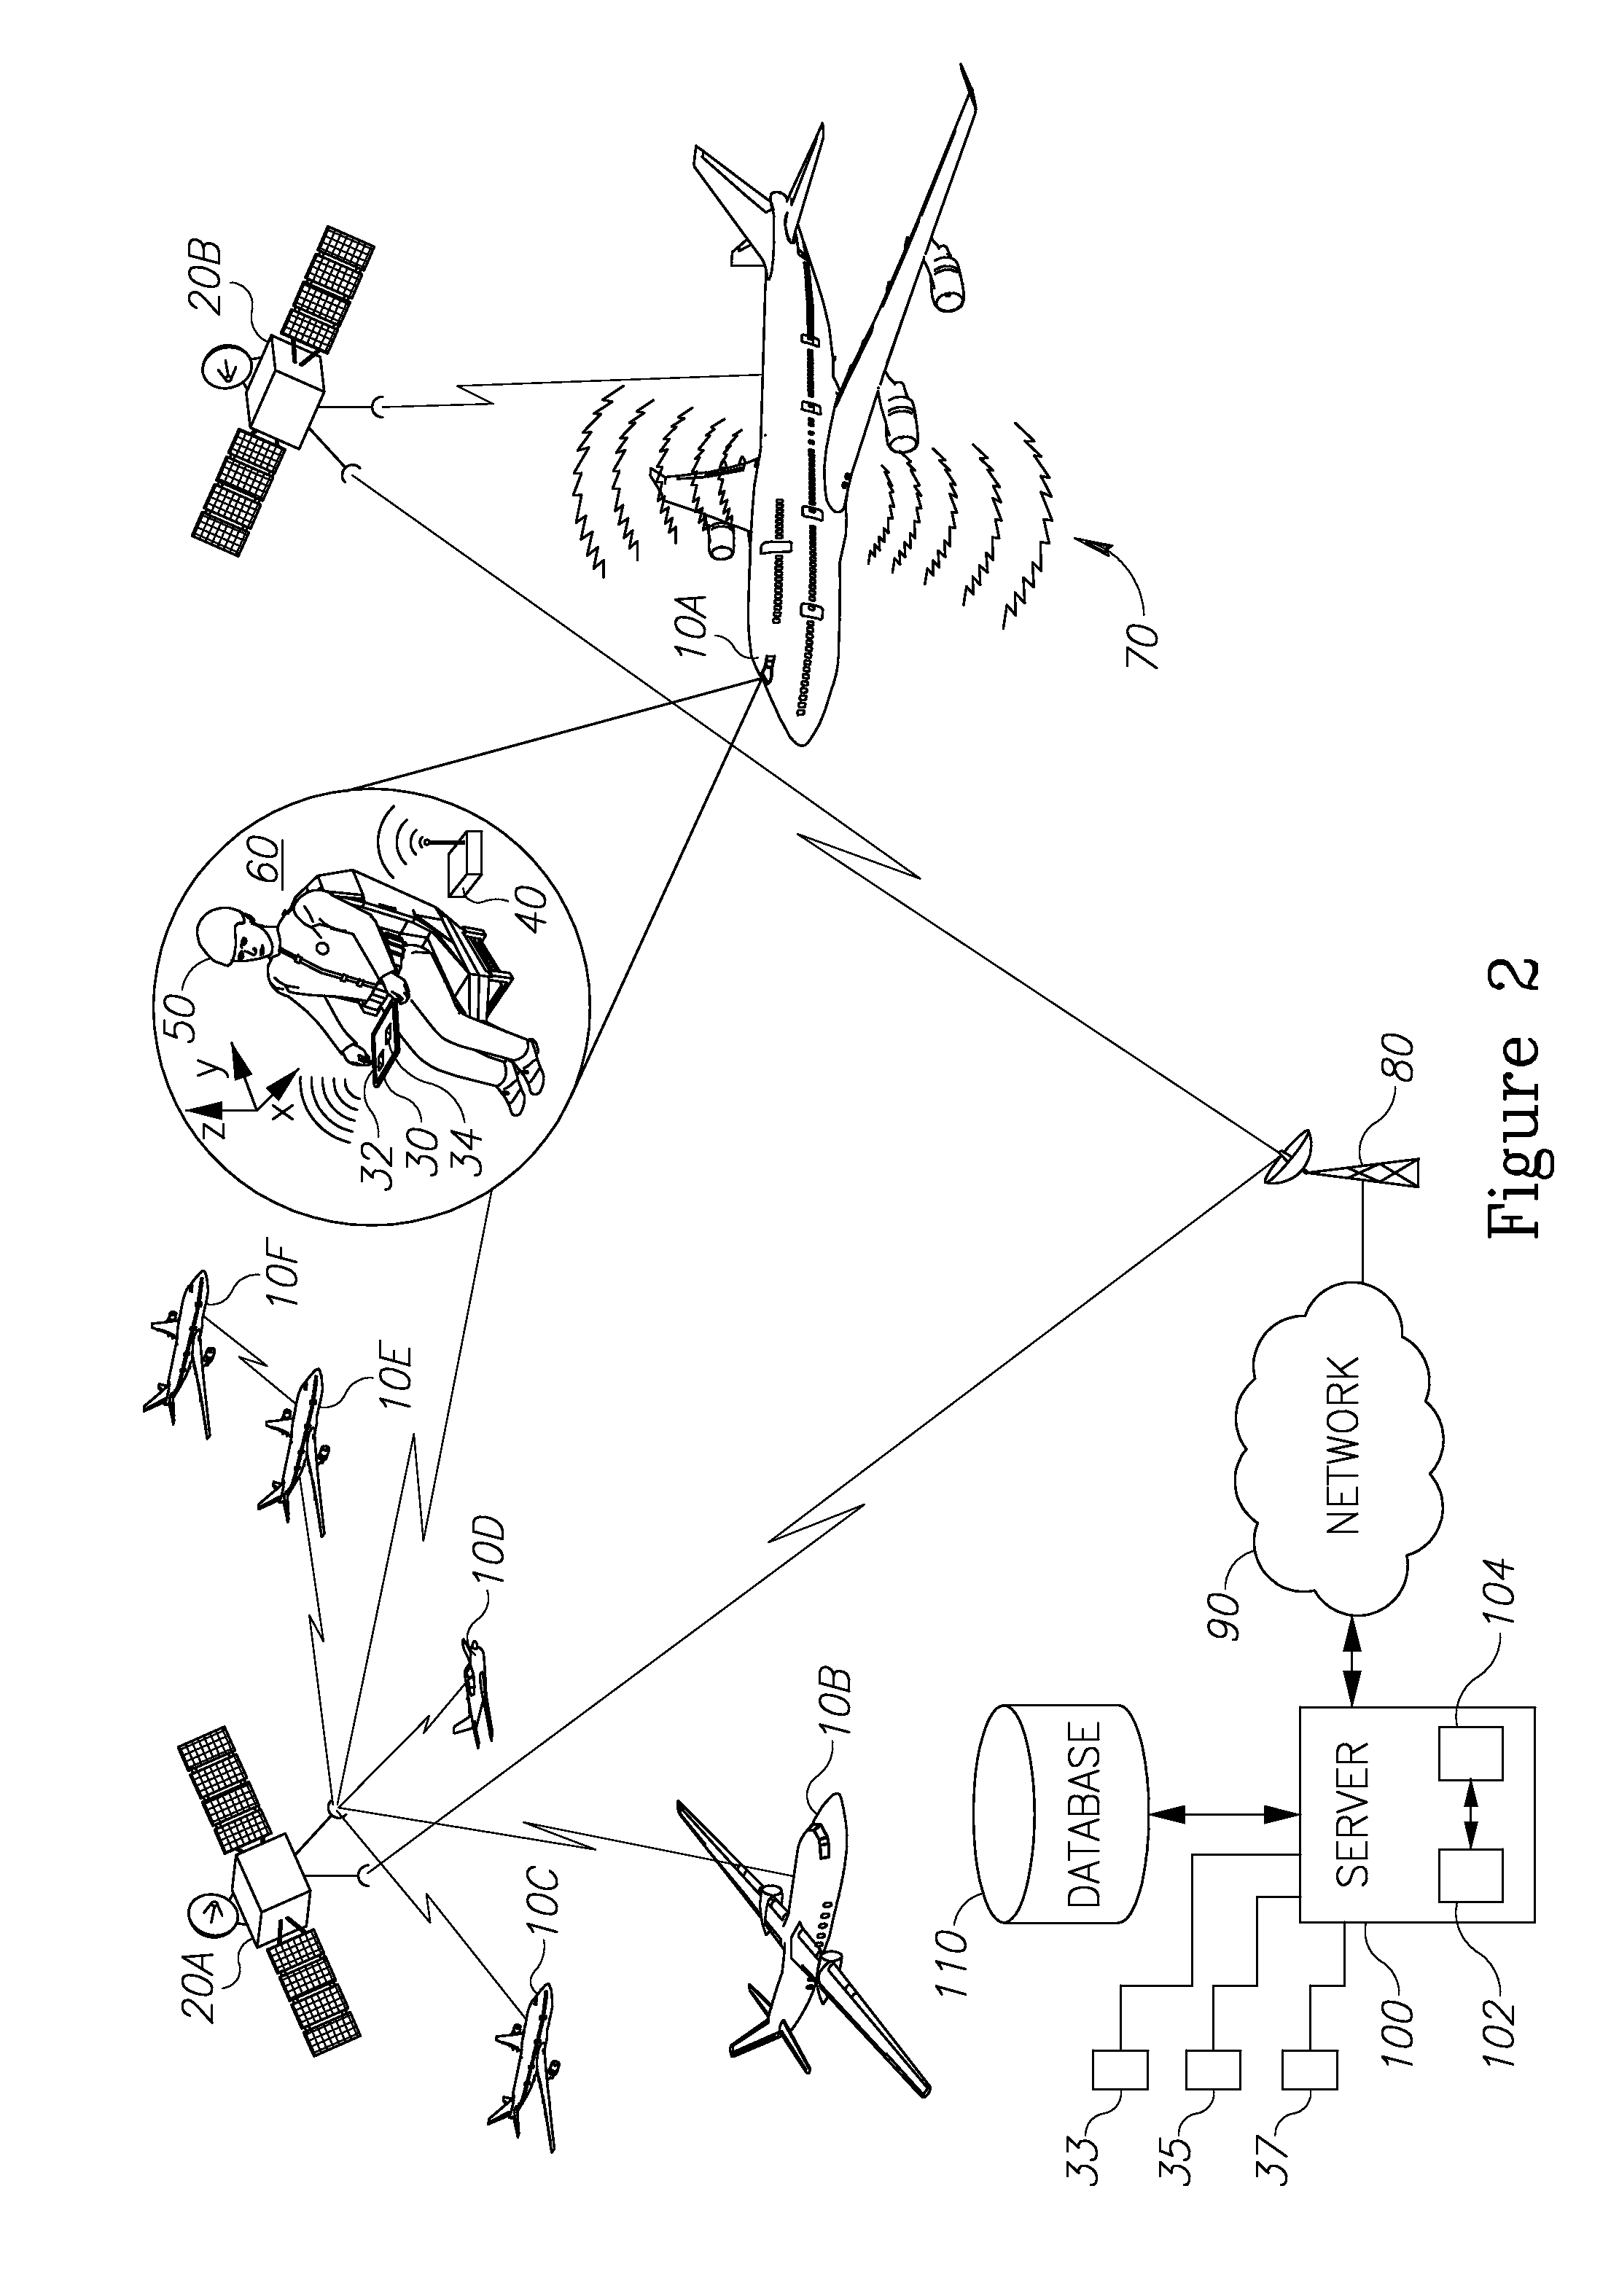 Method and system for obtaining and presenting turbulence data via communication devices located on airplanes